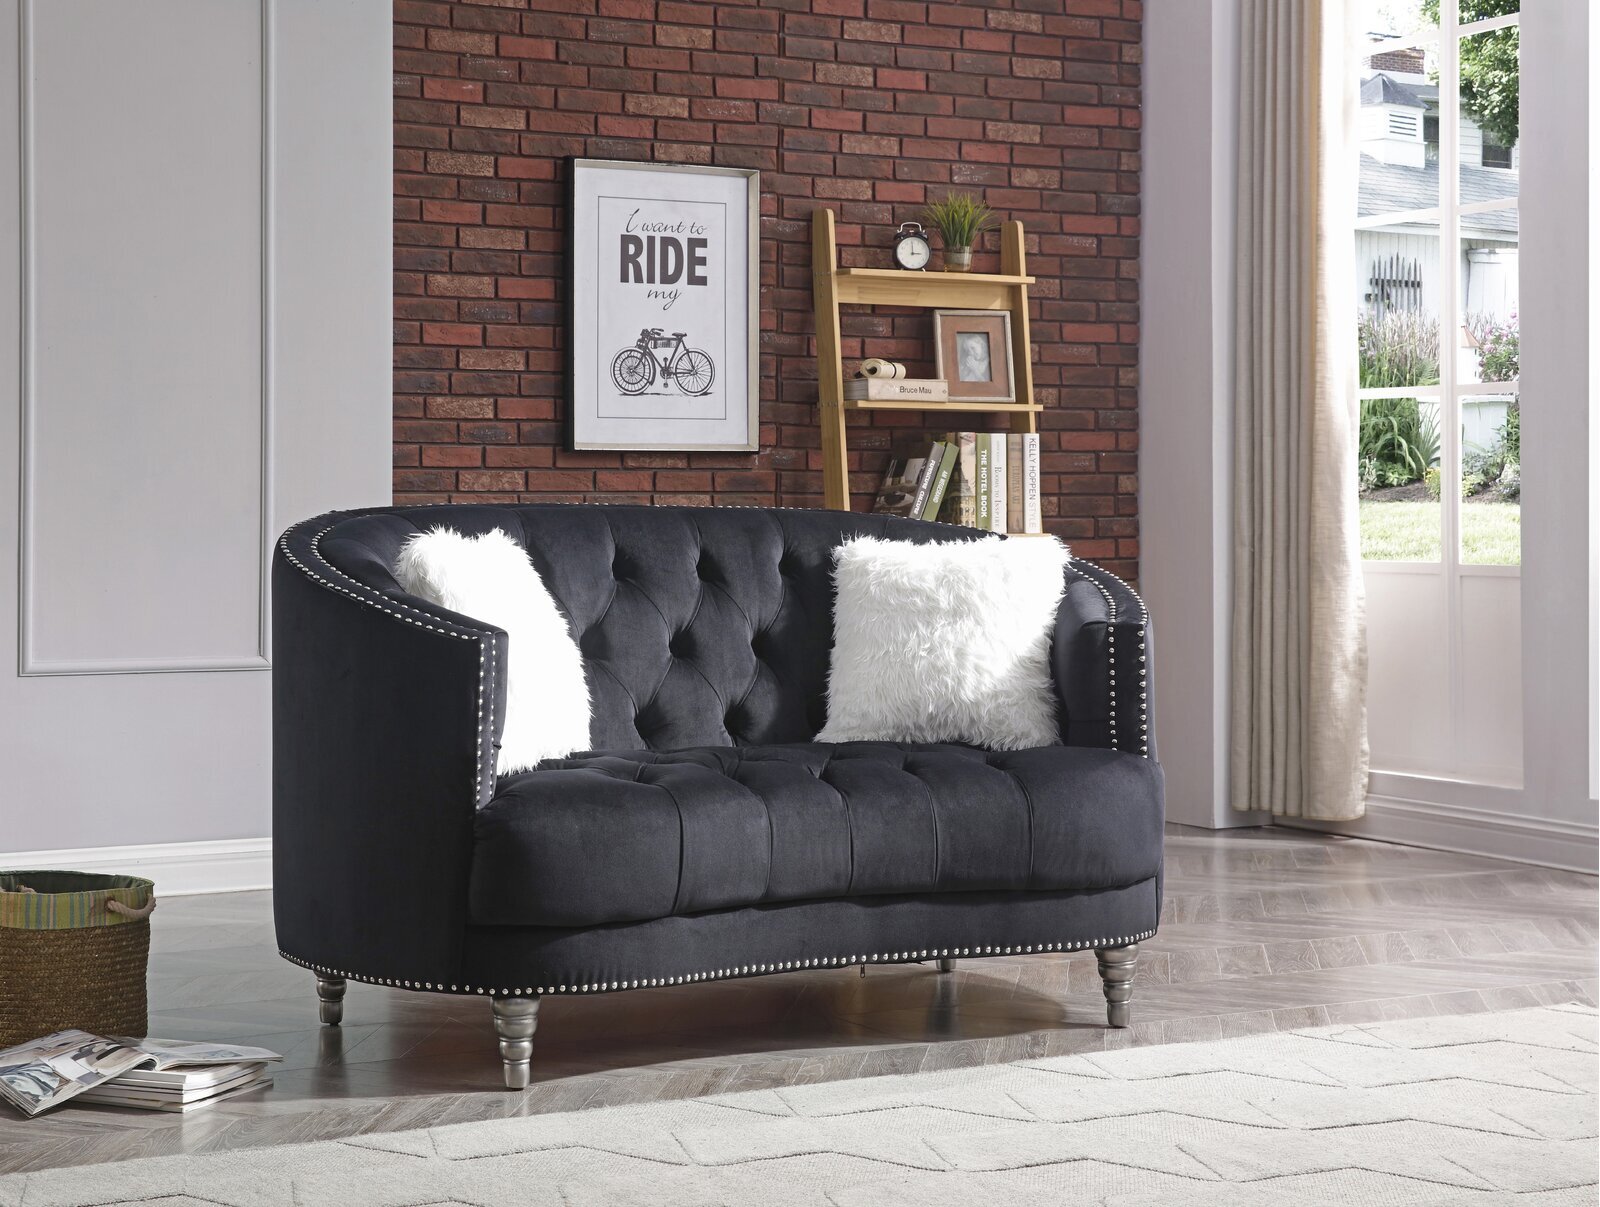 Texturize Curved Loveseats for Small Spaces with Velvet